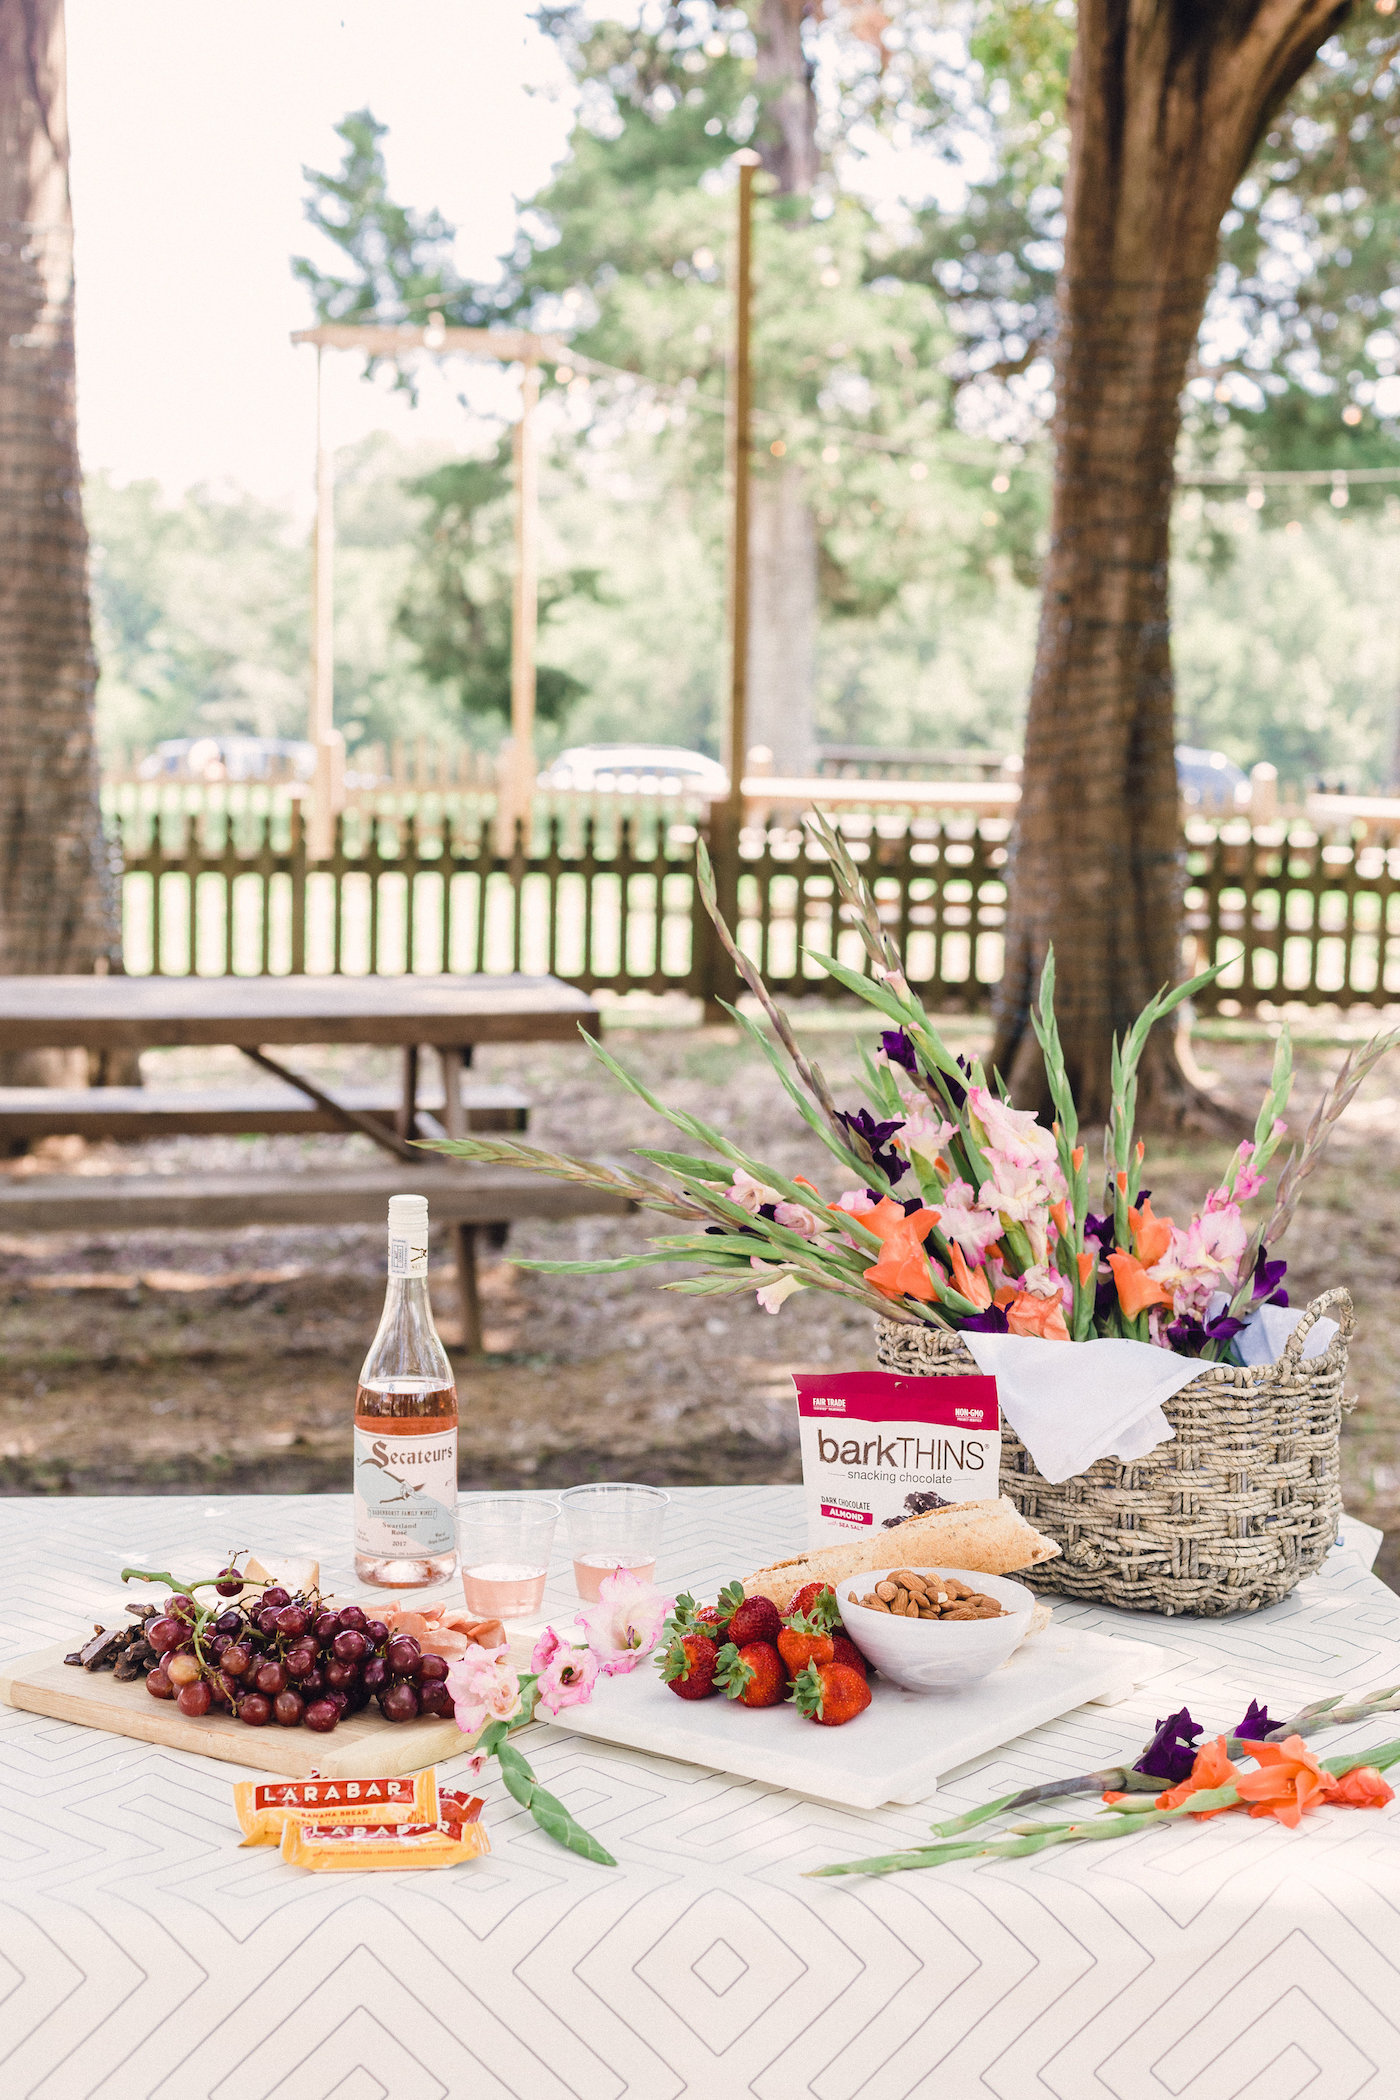 A Picnic styled around a beautiful bottle of South African Rosé // www.thehiveblog.com